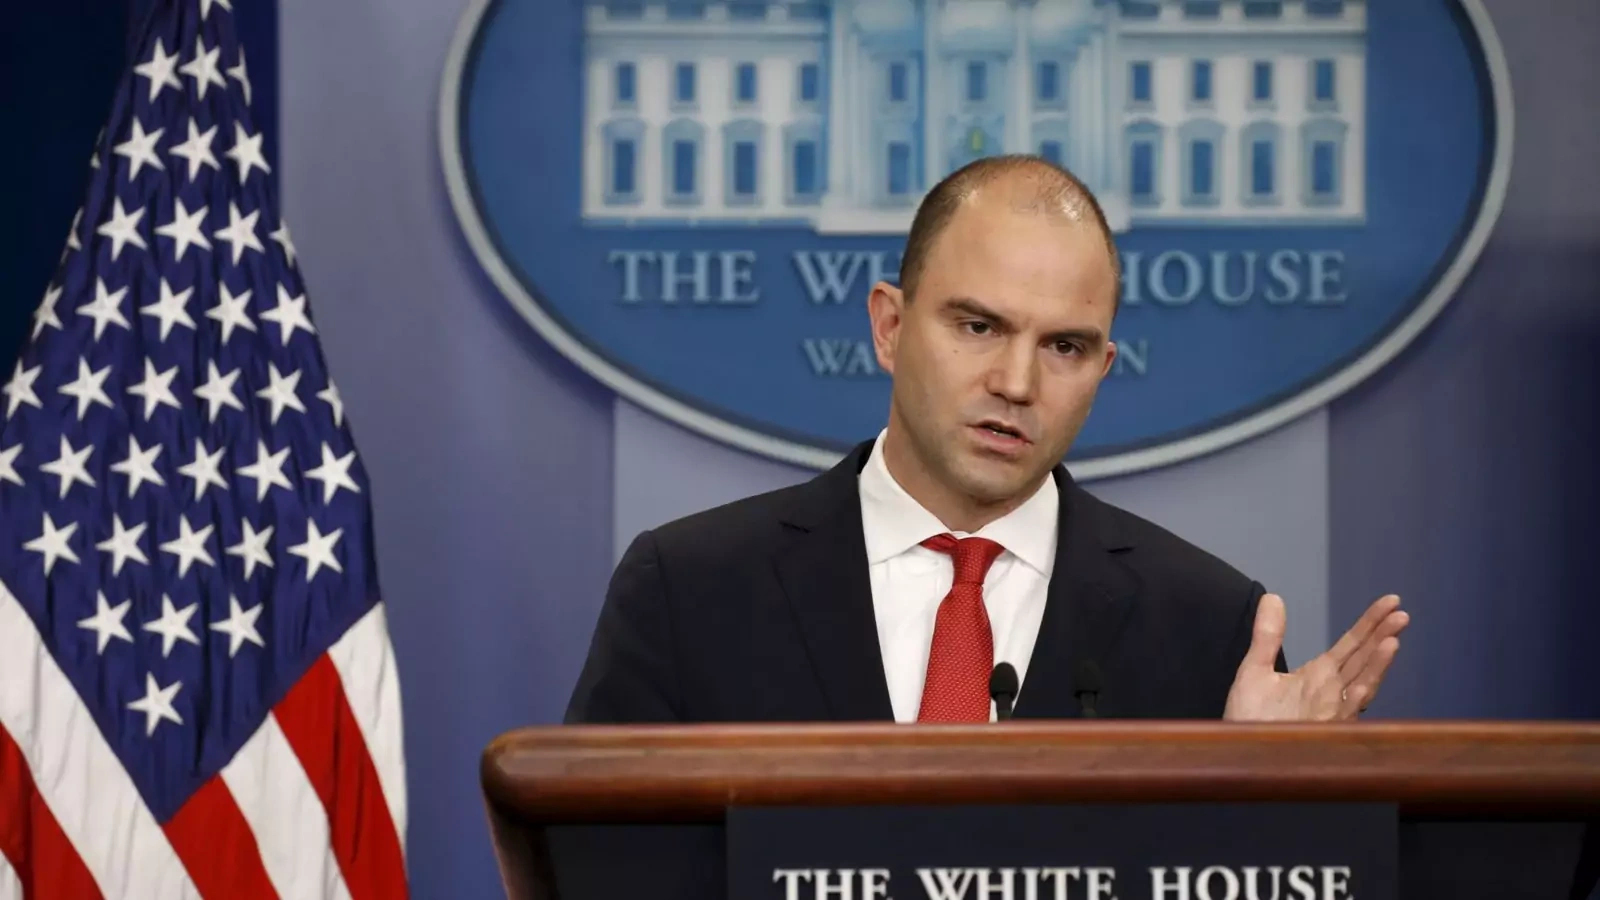 U.S. Deputy National Security Advisor Ben Rhodes speaks about Obama's upcoming visit to Cuba at the White House in Washington February 18, 2016. U.S. President Barack Obama on Thursday announced a historic visit to Cuba next month, speeding up the thaw in